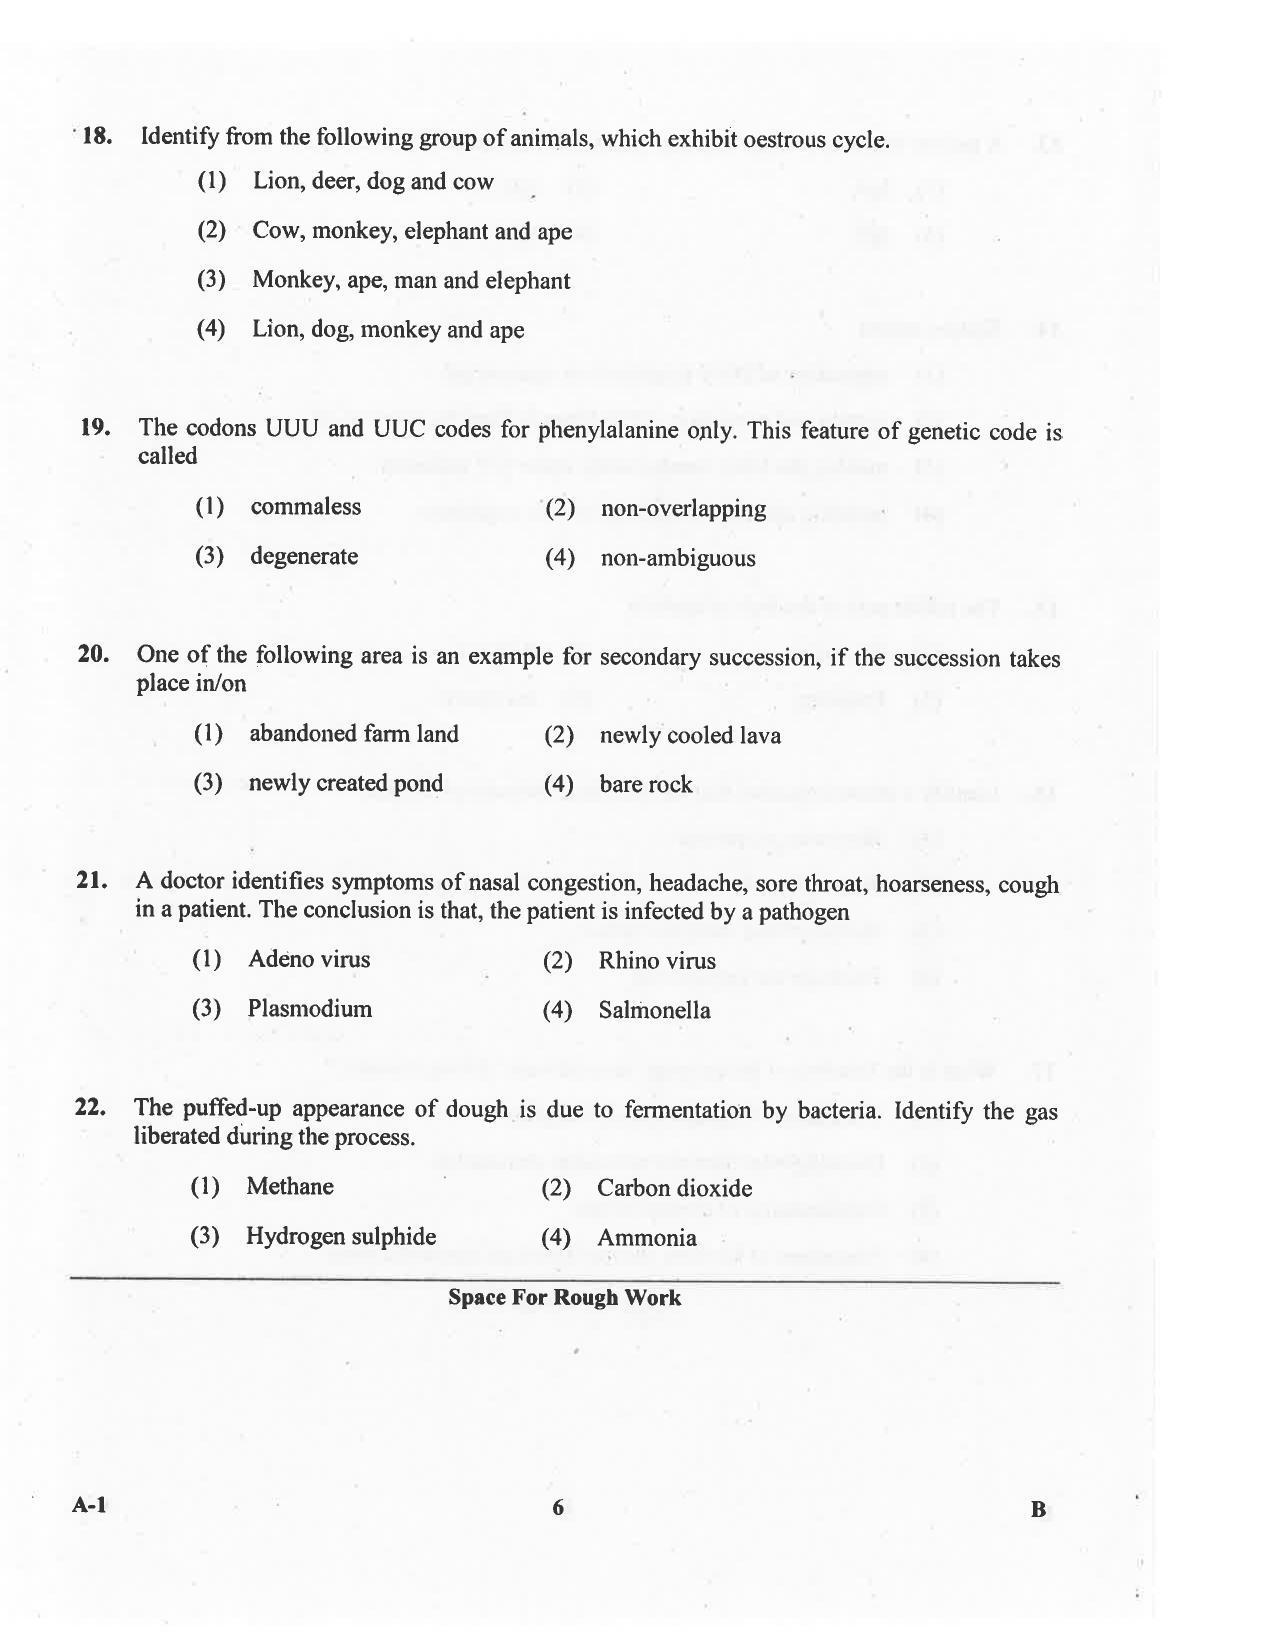 KCET Biology 2016 Question Papers - Page 6